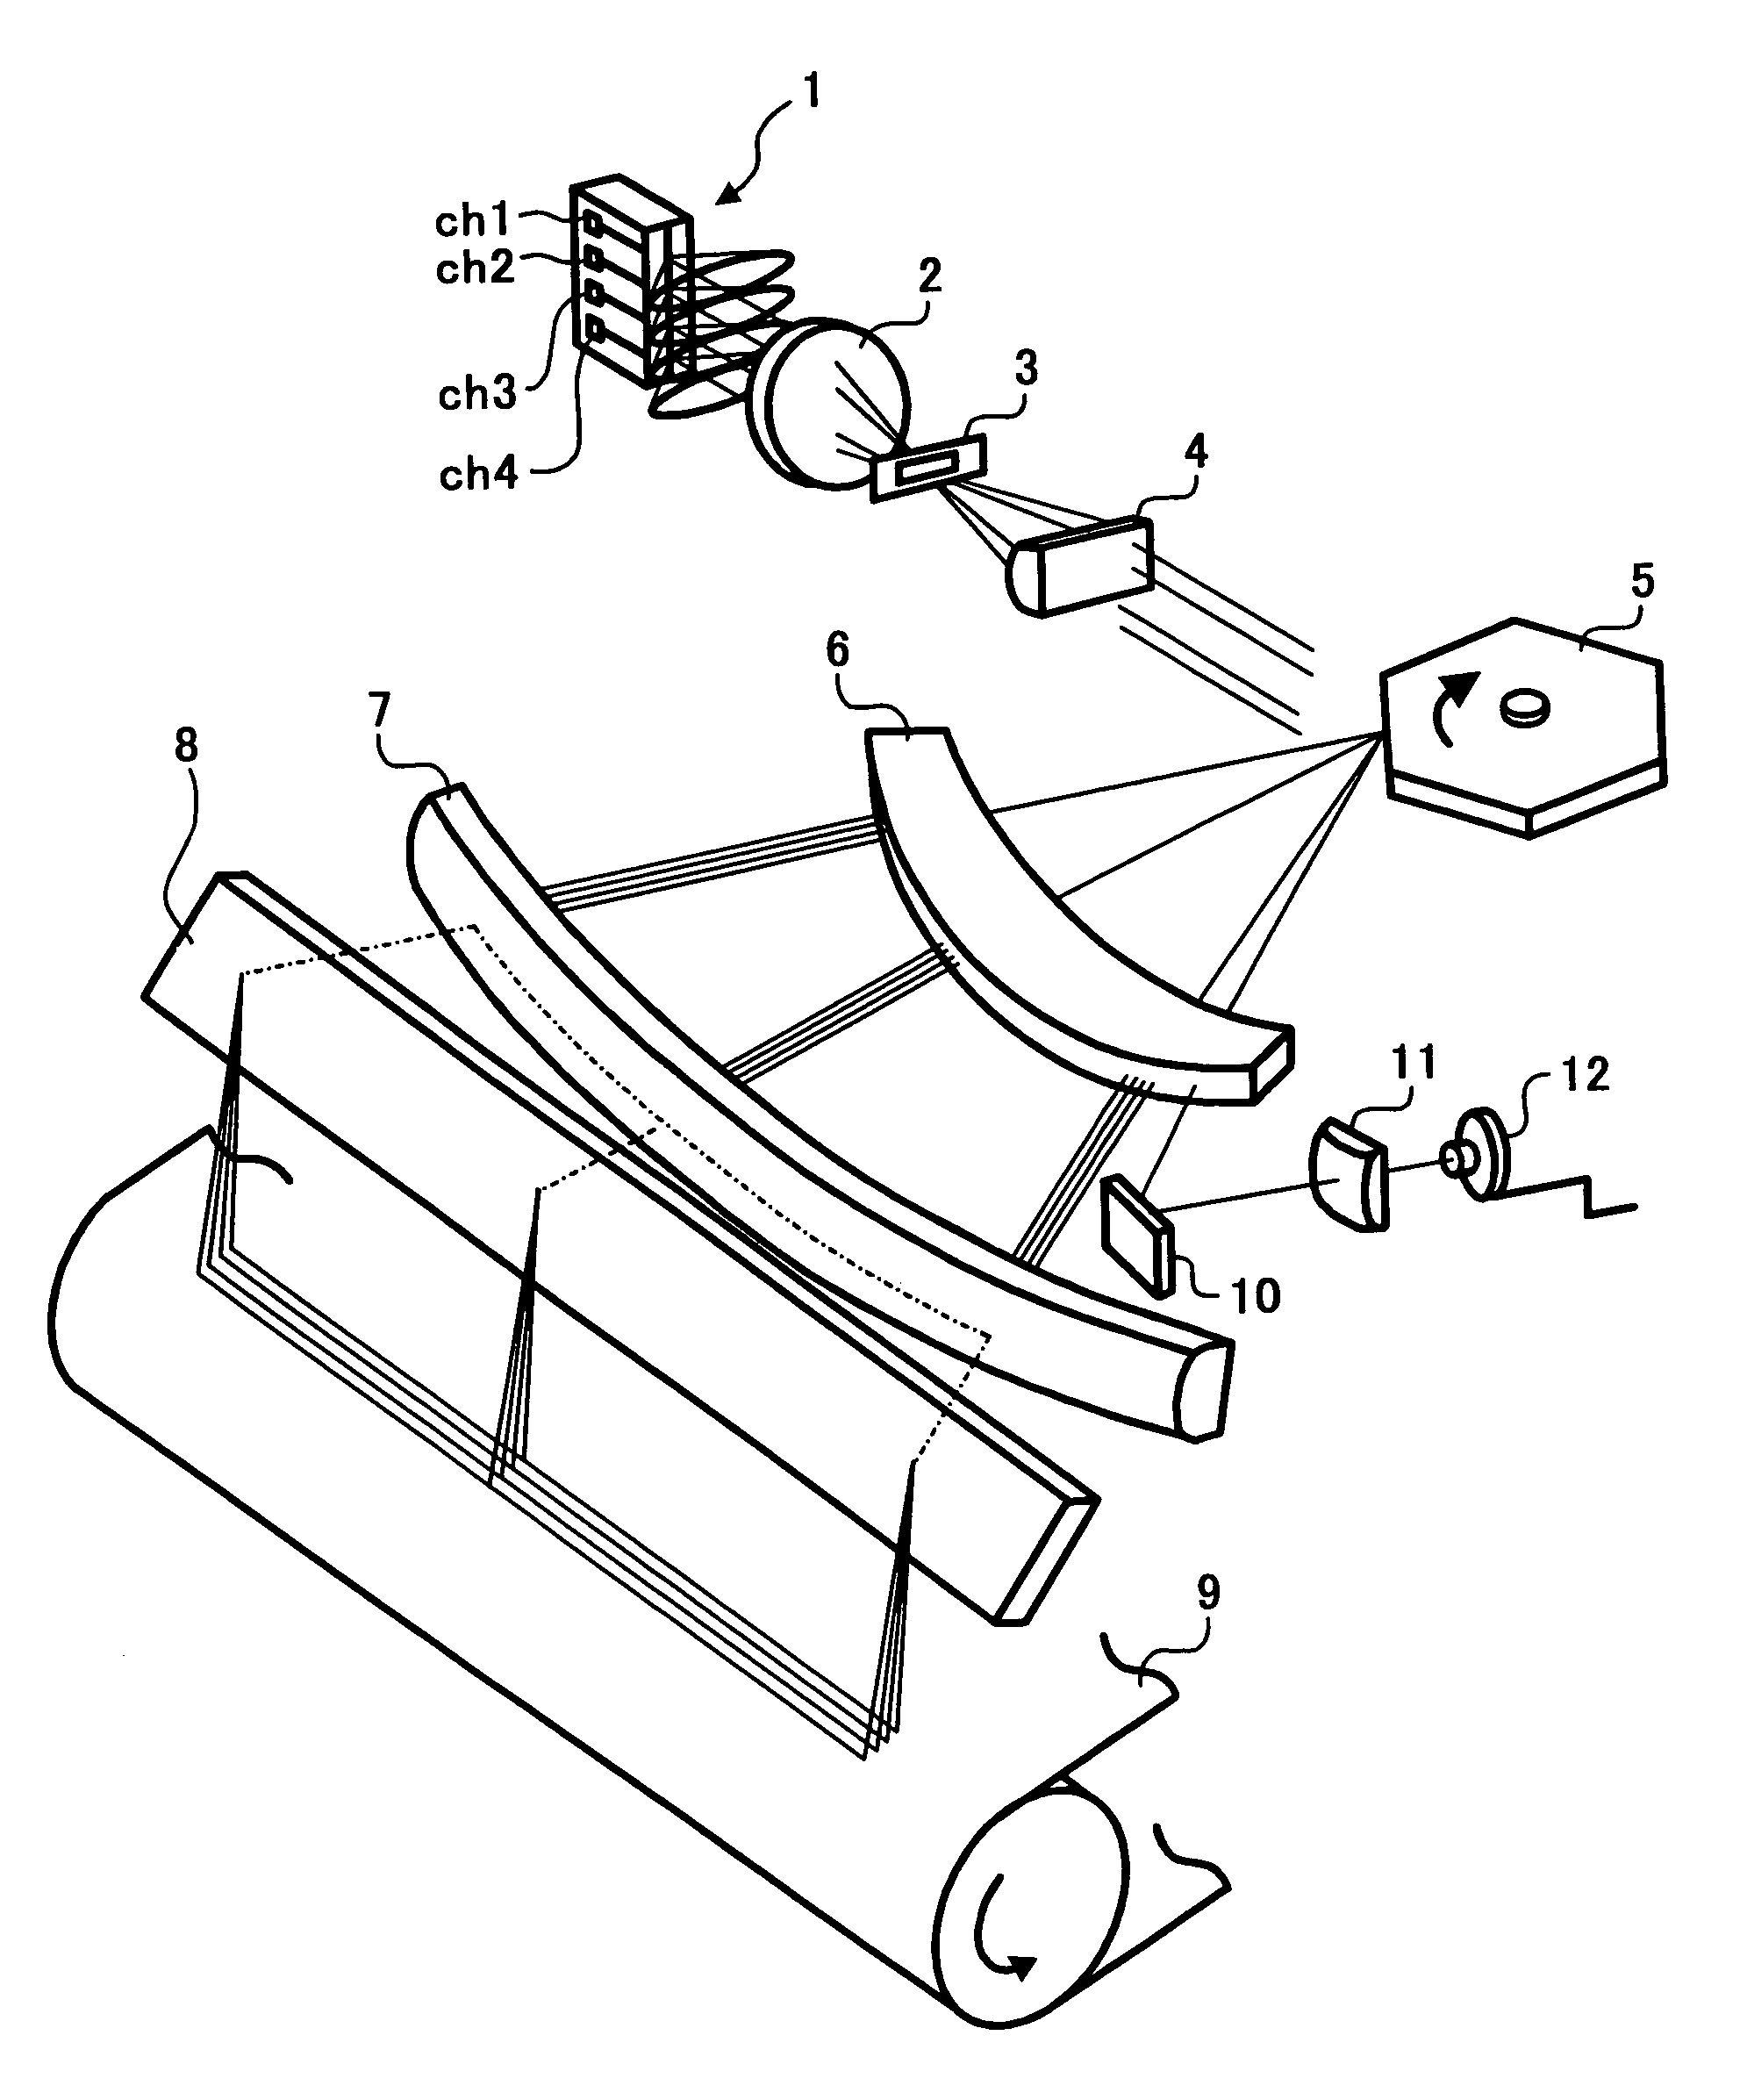 Multi-beam optical scanning apparatus and image forming apparatus